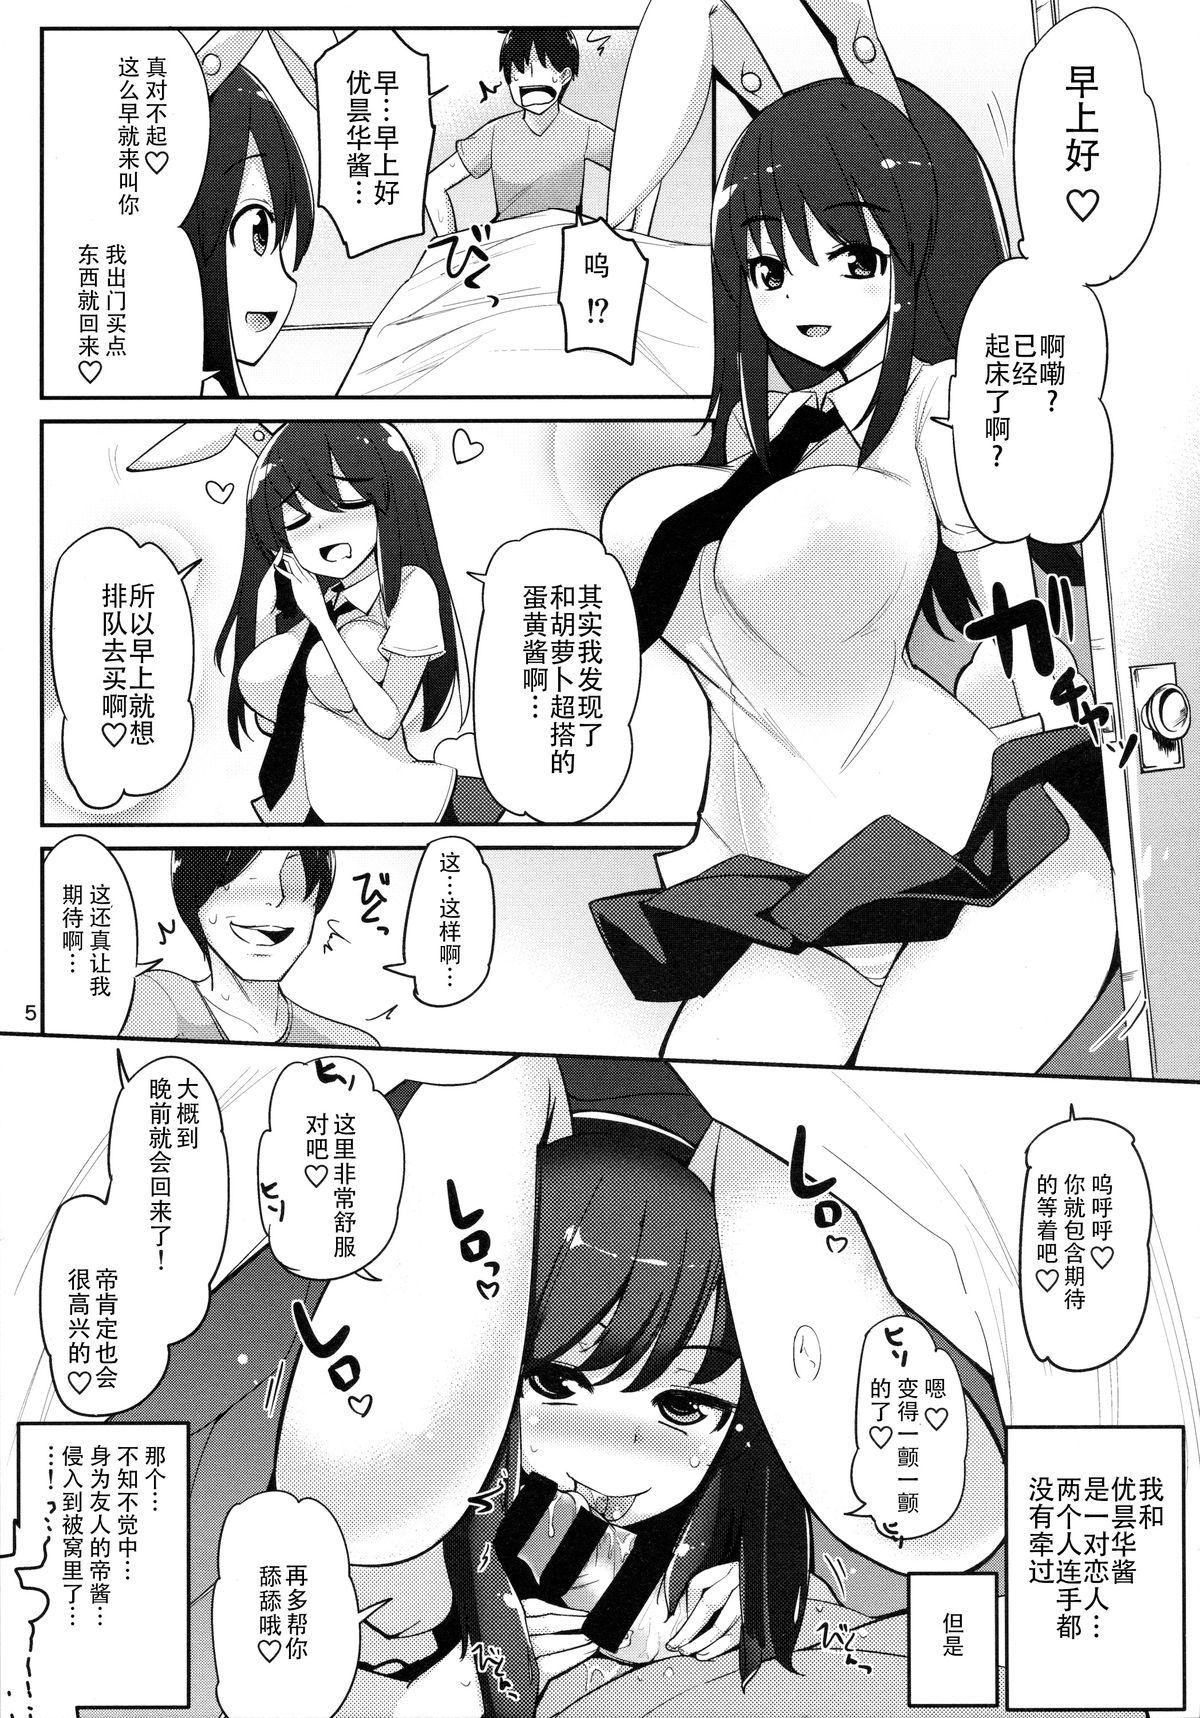 Perfect Girl Porn (Reitaisai 12) [Ippongui (Ippongui)] Uwaki Shite Tewi-chan to Sex Shita -Nikaime- (Touhou Project) [Chinese] [无毒汉化组] - Touhou project Tight Pussy Fucked - Page 4